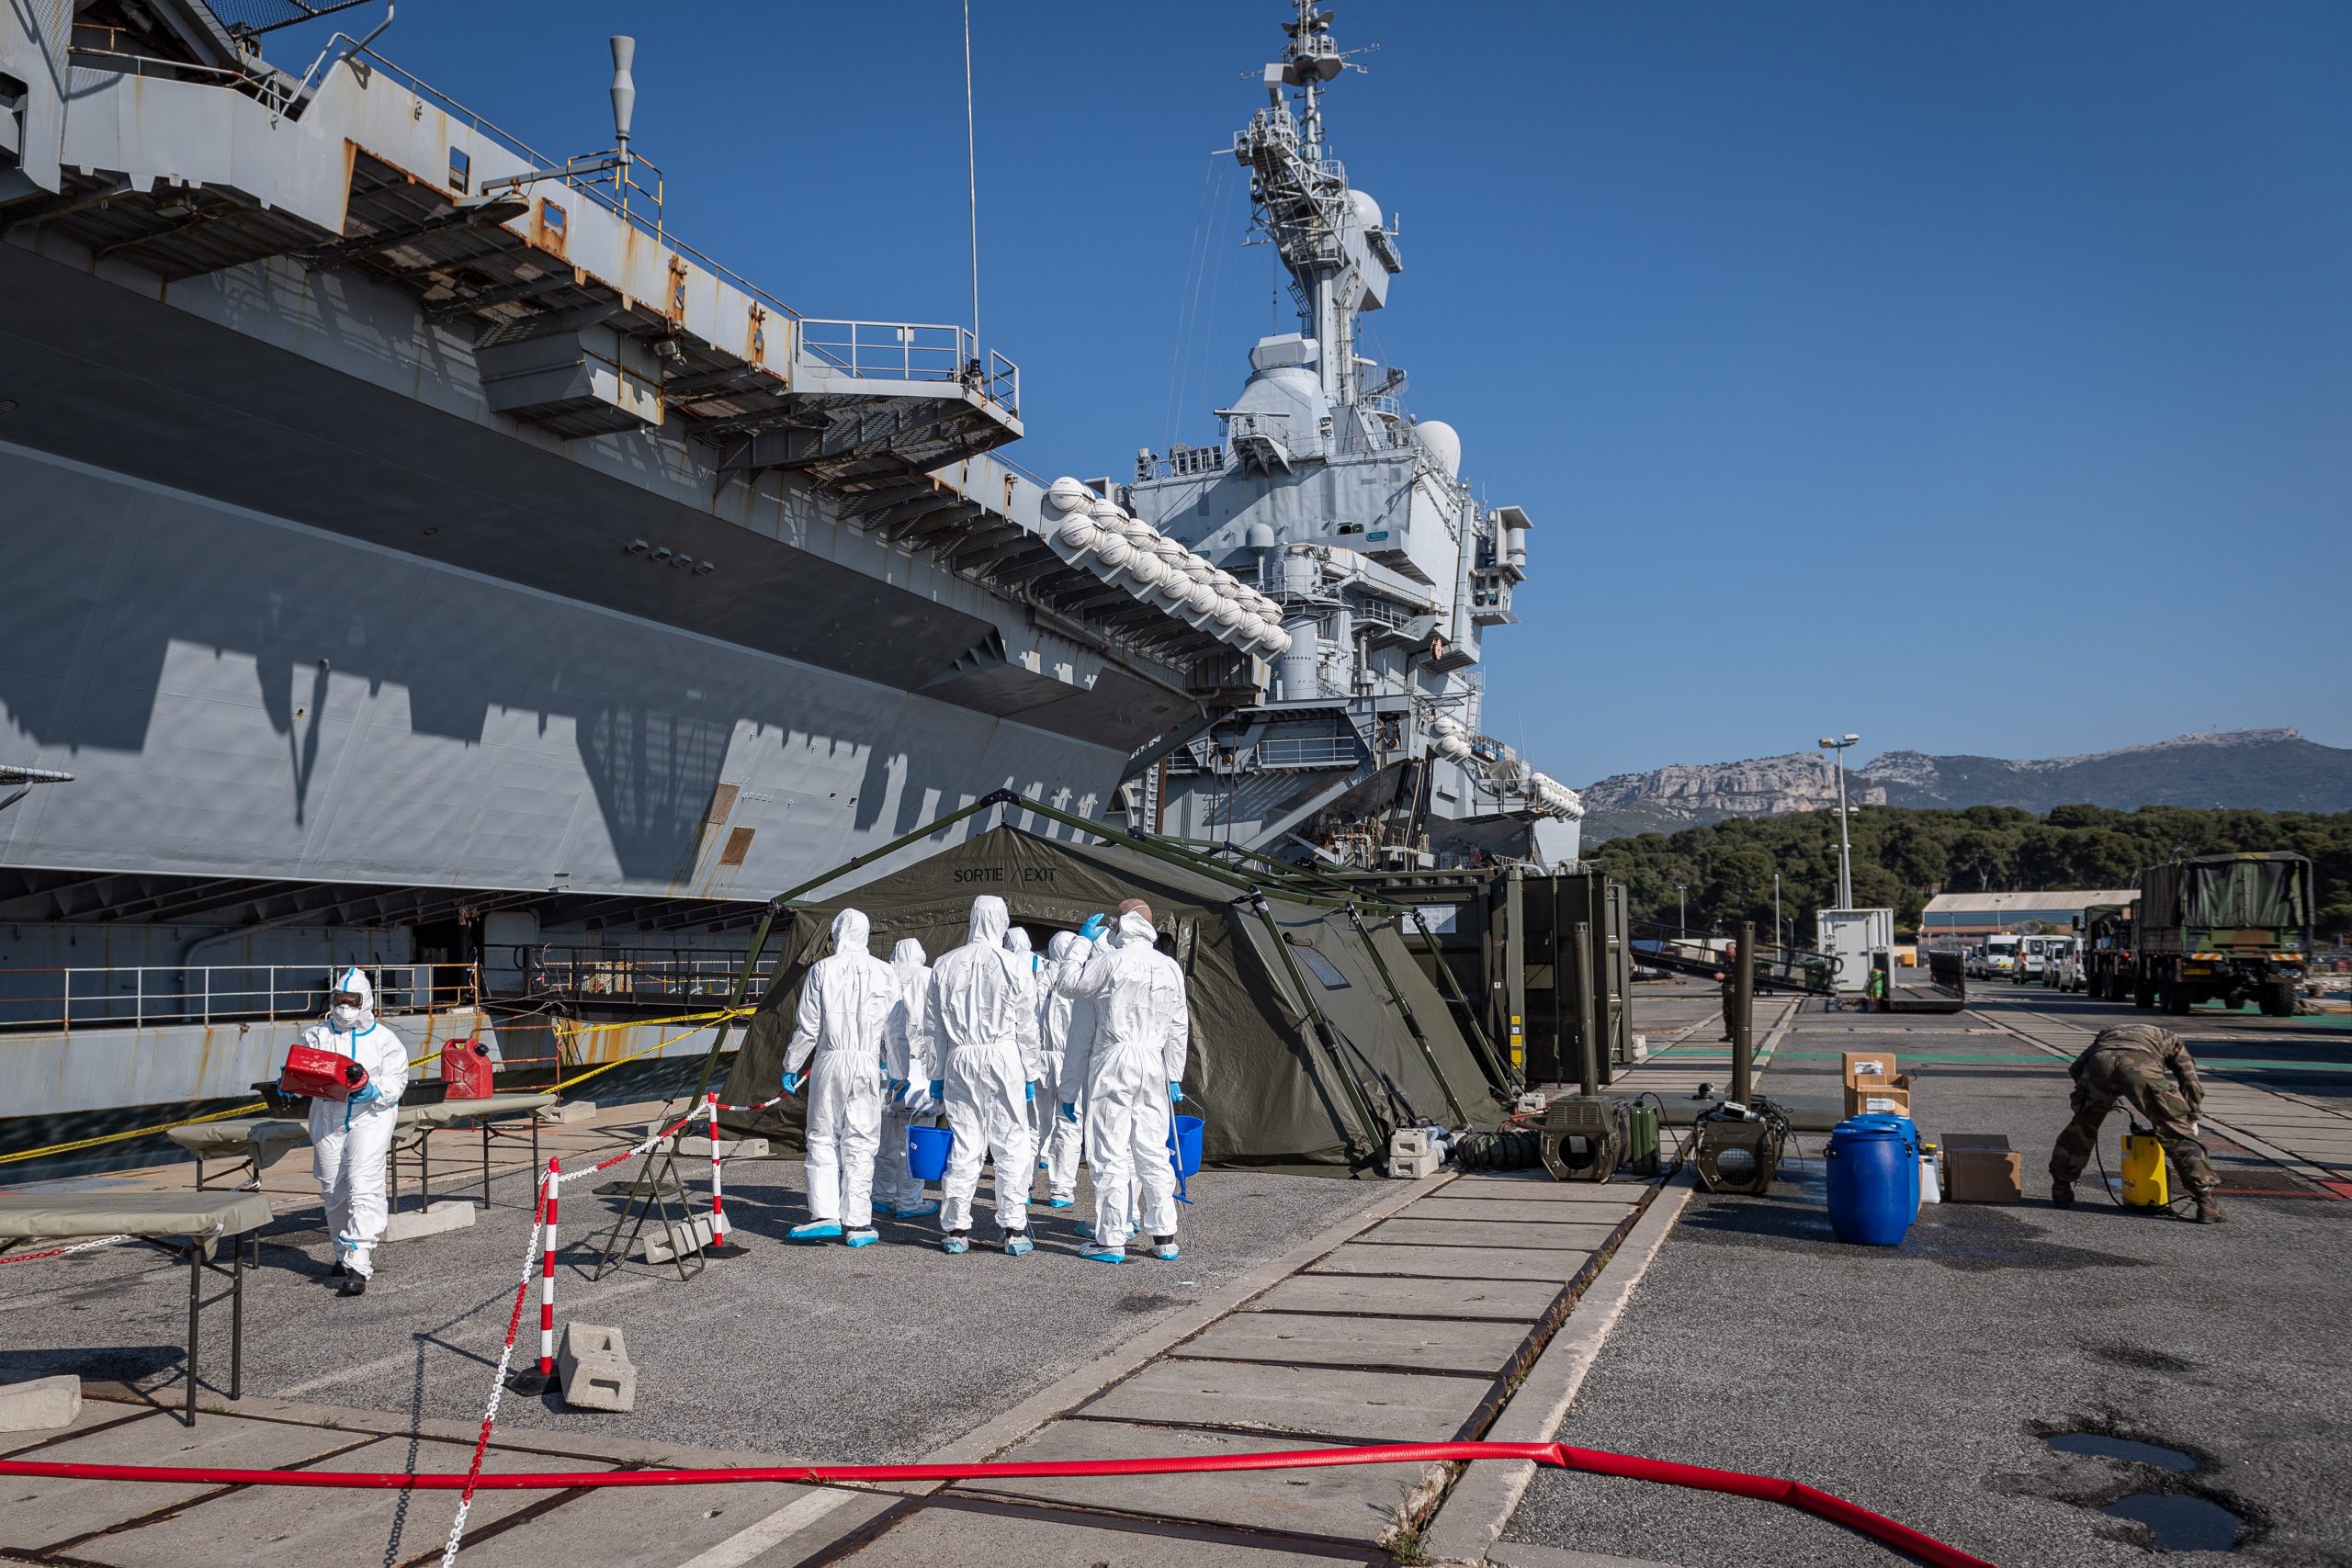 epa08367136 A handout photo made available by the French Defense Ministry on 16 April 2020 shows officers getting prepared to work on cleaning and disinfecting the French nuclear aircraft carrier Charles De Gaulle in Toulon, France, 15 April 2020. The French Defense Minister announced on 15 April 2020 that 668 people tested positive for the coronavirus in the aircraft carrier Charles de Gaulle.  EPA/BENOIT EMILE  HANDOUT EDITORIAL USE ONLY/NO SALES